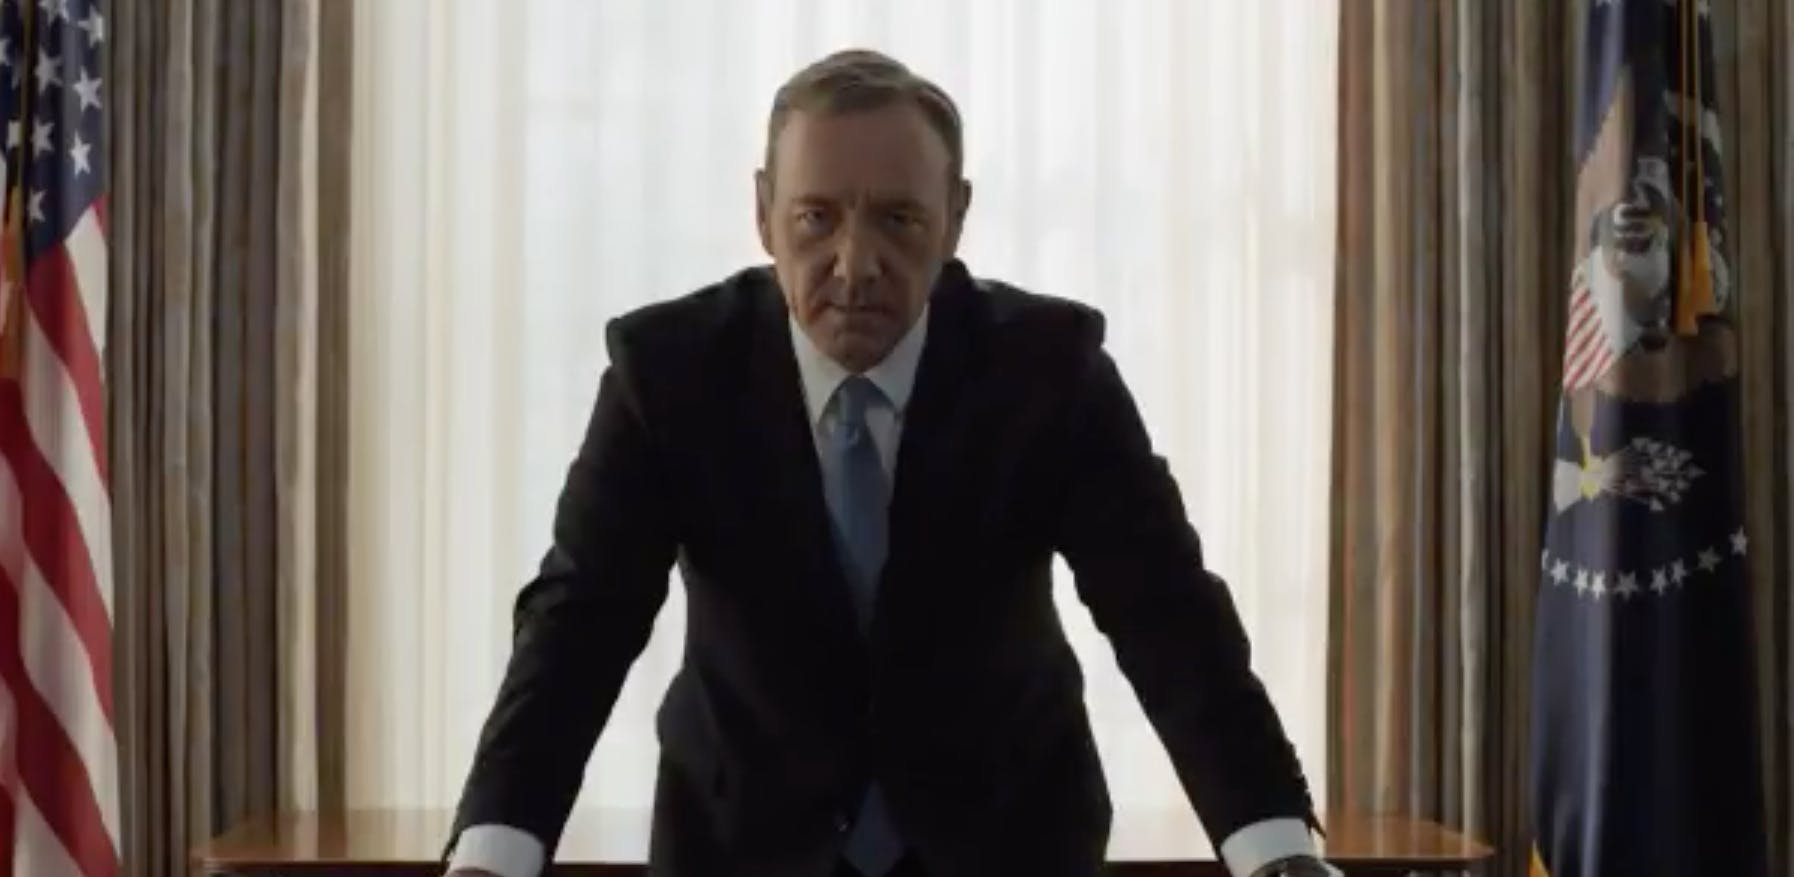 A teaser clip revealing the House of Cards season 5 release date